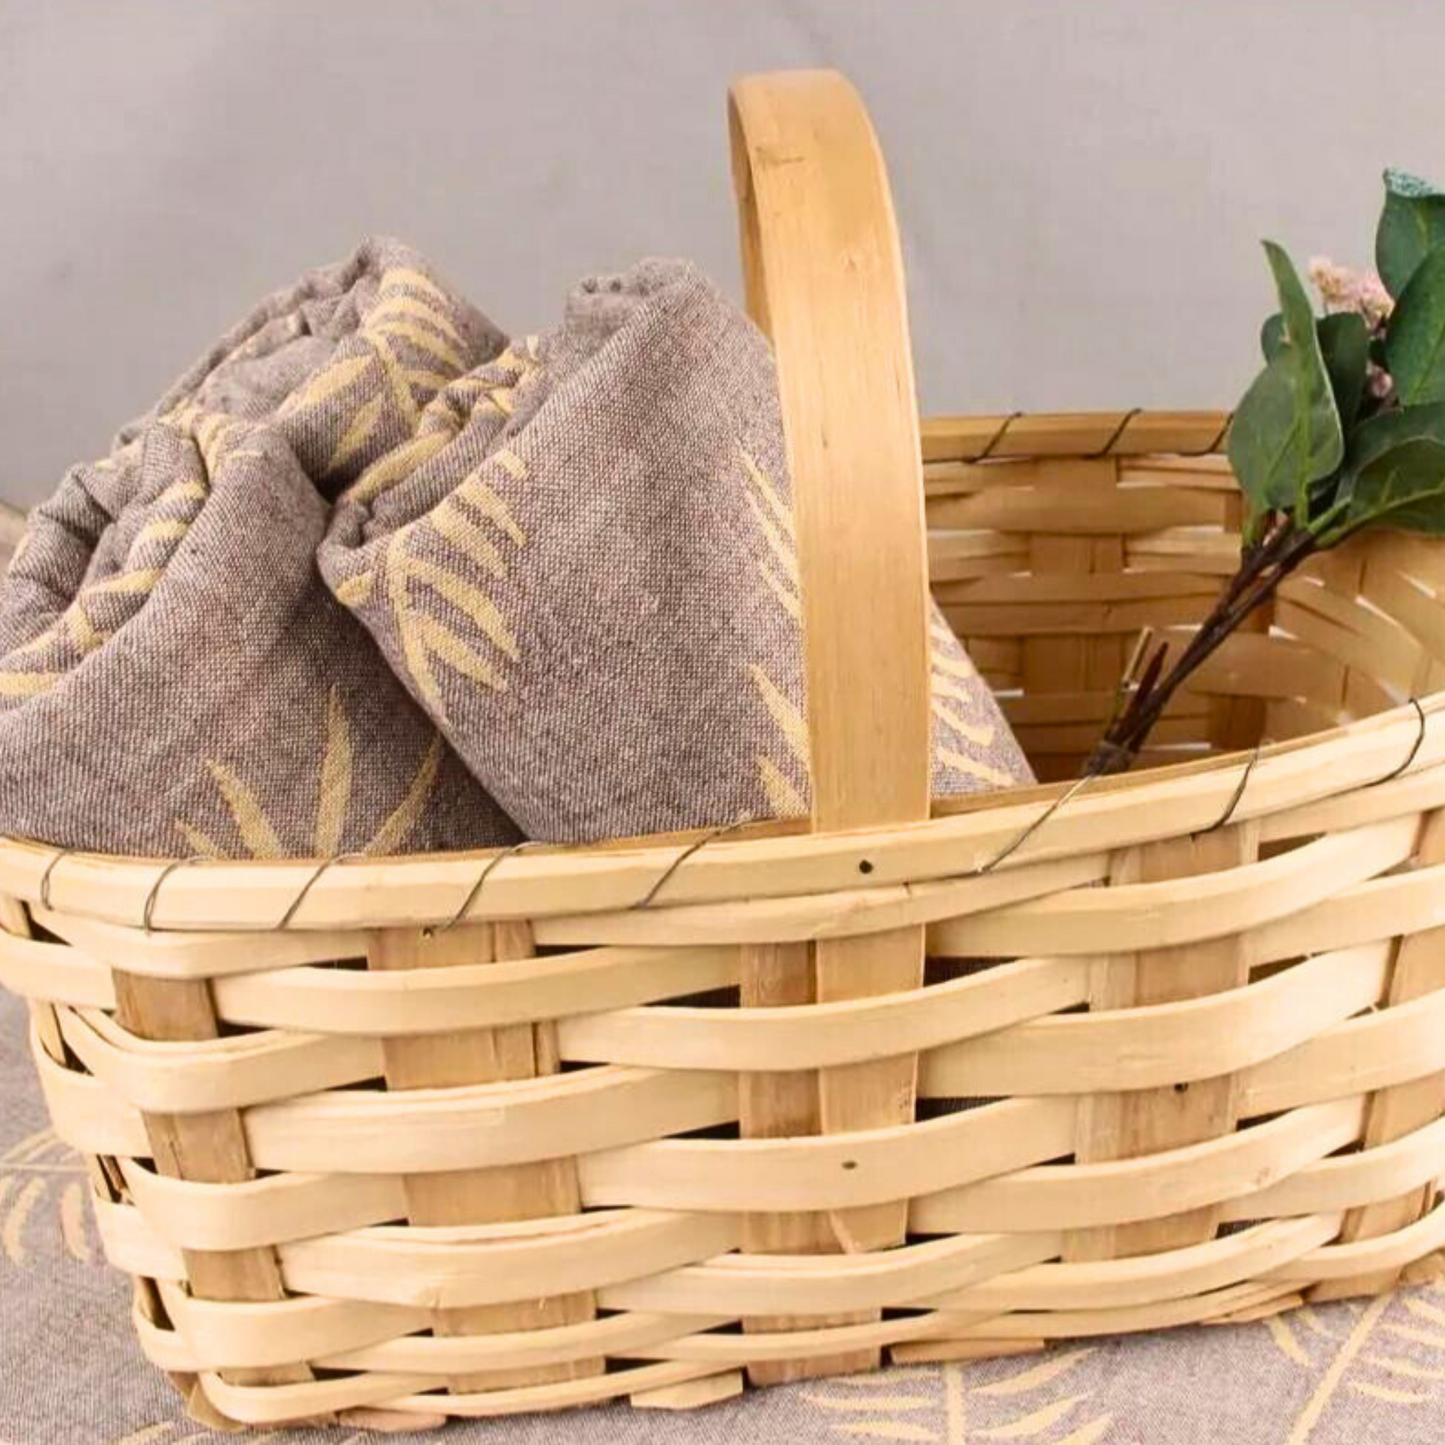 FERN Turkish Towels folded in a light wooden basket, accented with green leaves and twigs